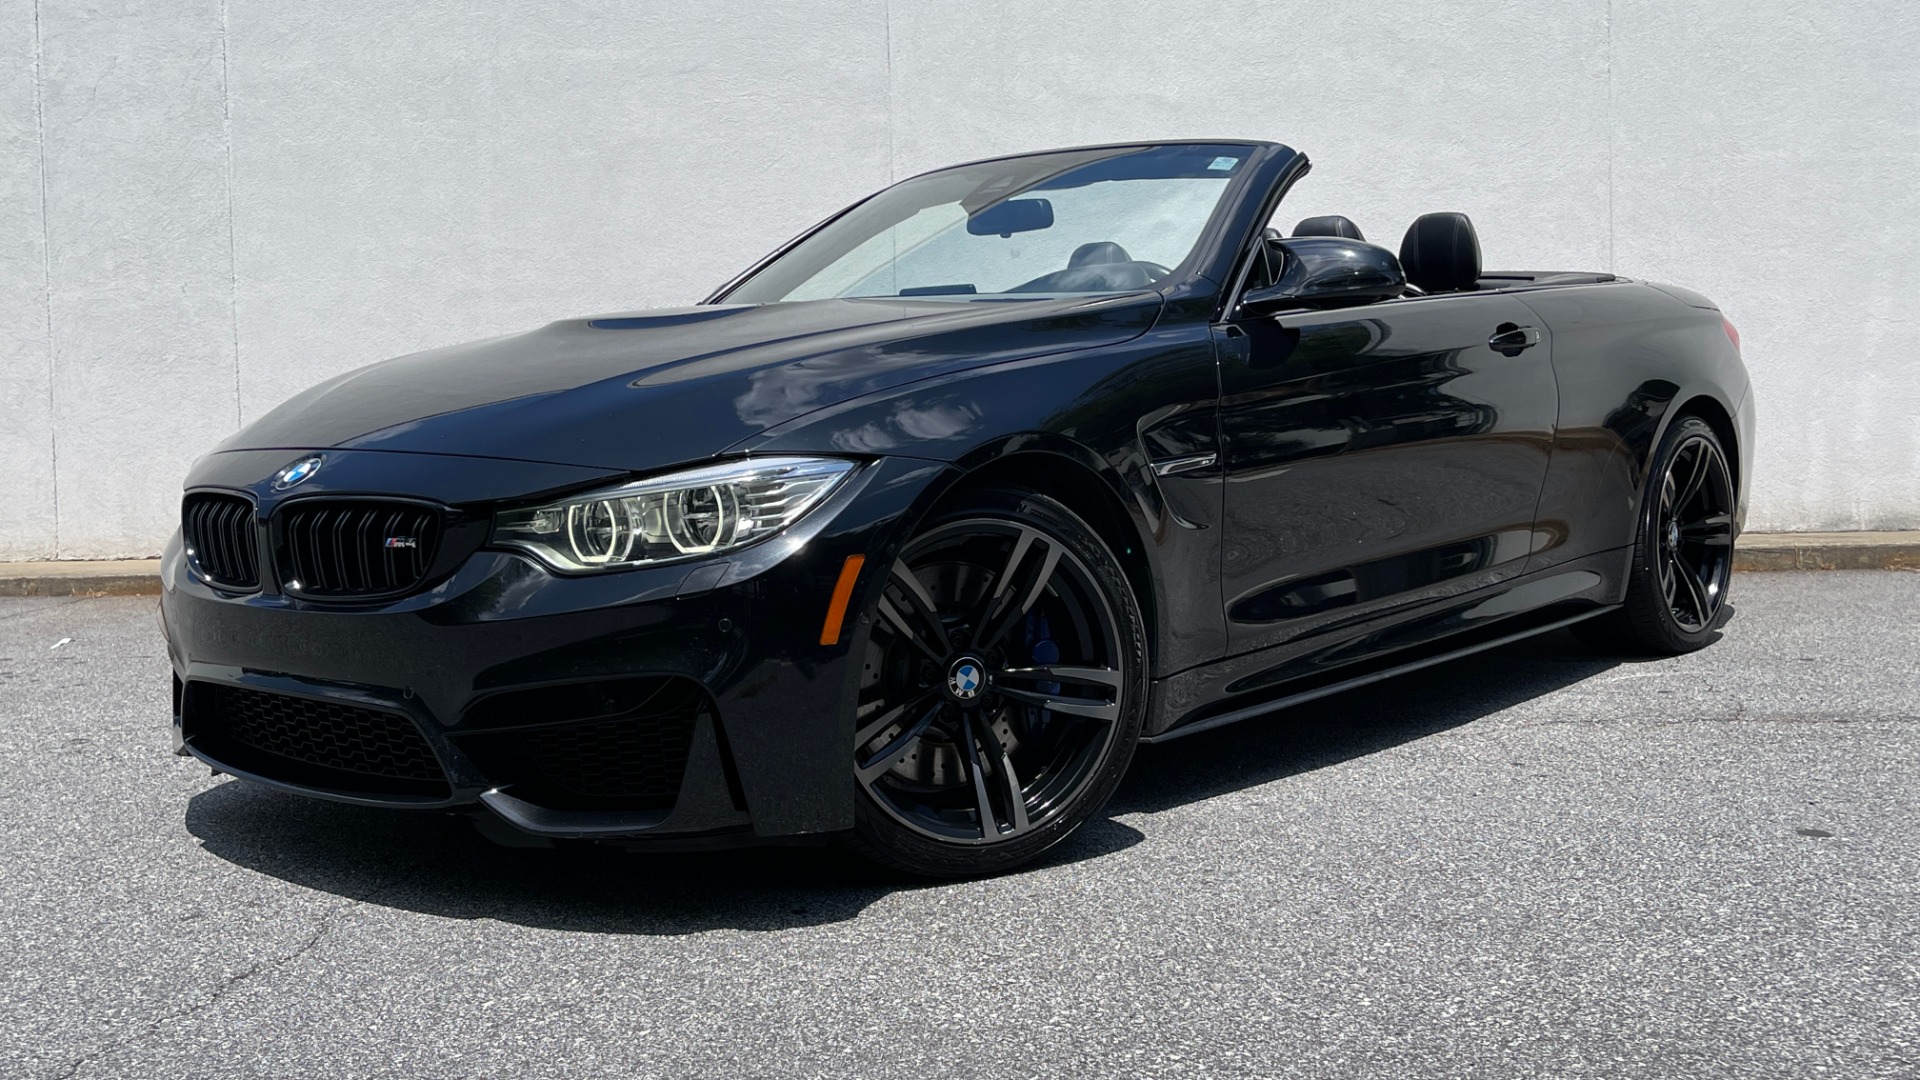 Used 2016 BMW M4 CONVERTIBLE / EXECUTIVE / DUAL CLUTCH / ADAPTIVE M SUSPENSION for sale $44,000 at Formula Imports in Charlotte NC 28227 1